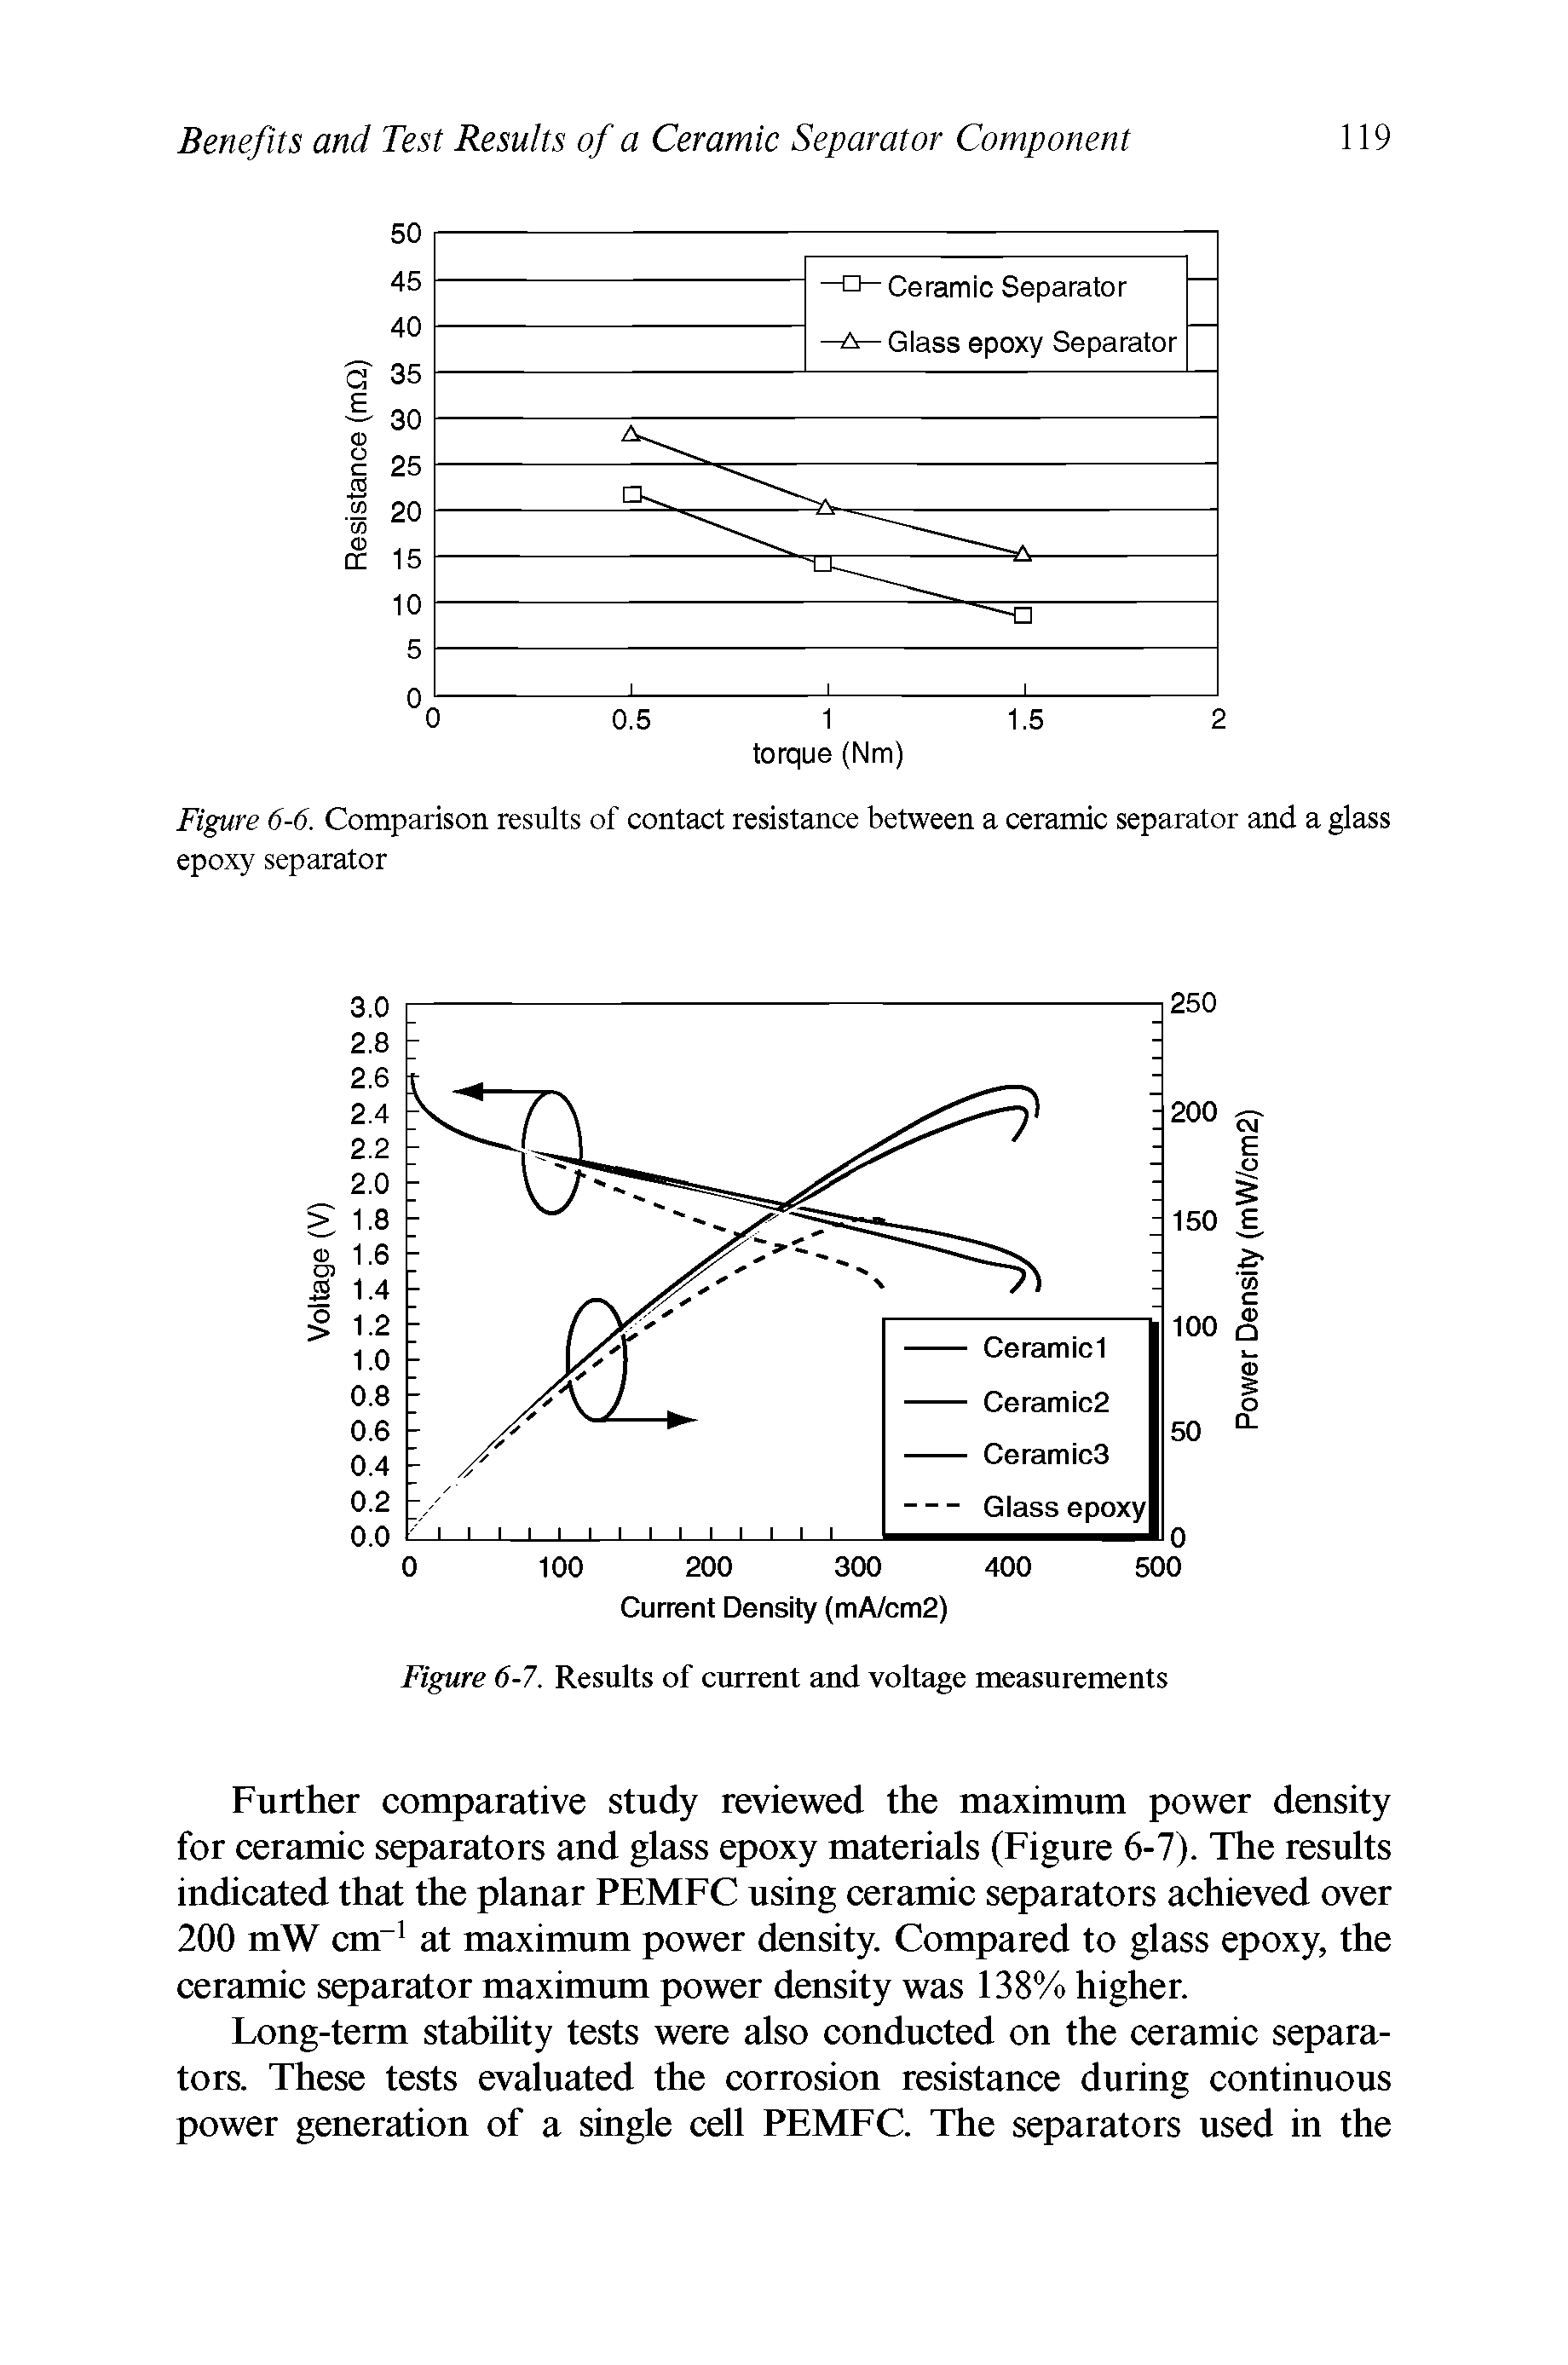 Figure 6-6. Comparison results of contact resistance between a ceramic separator and a glass epoxy separator...